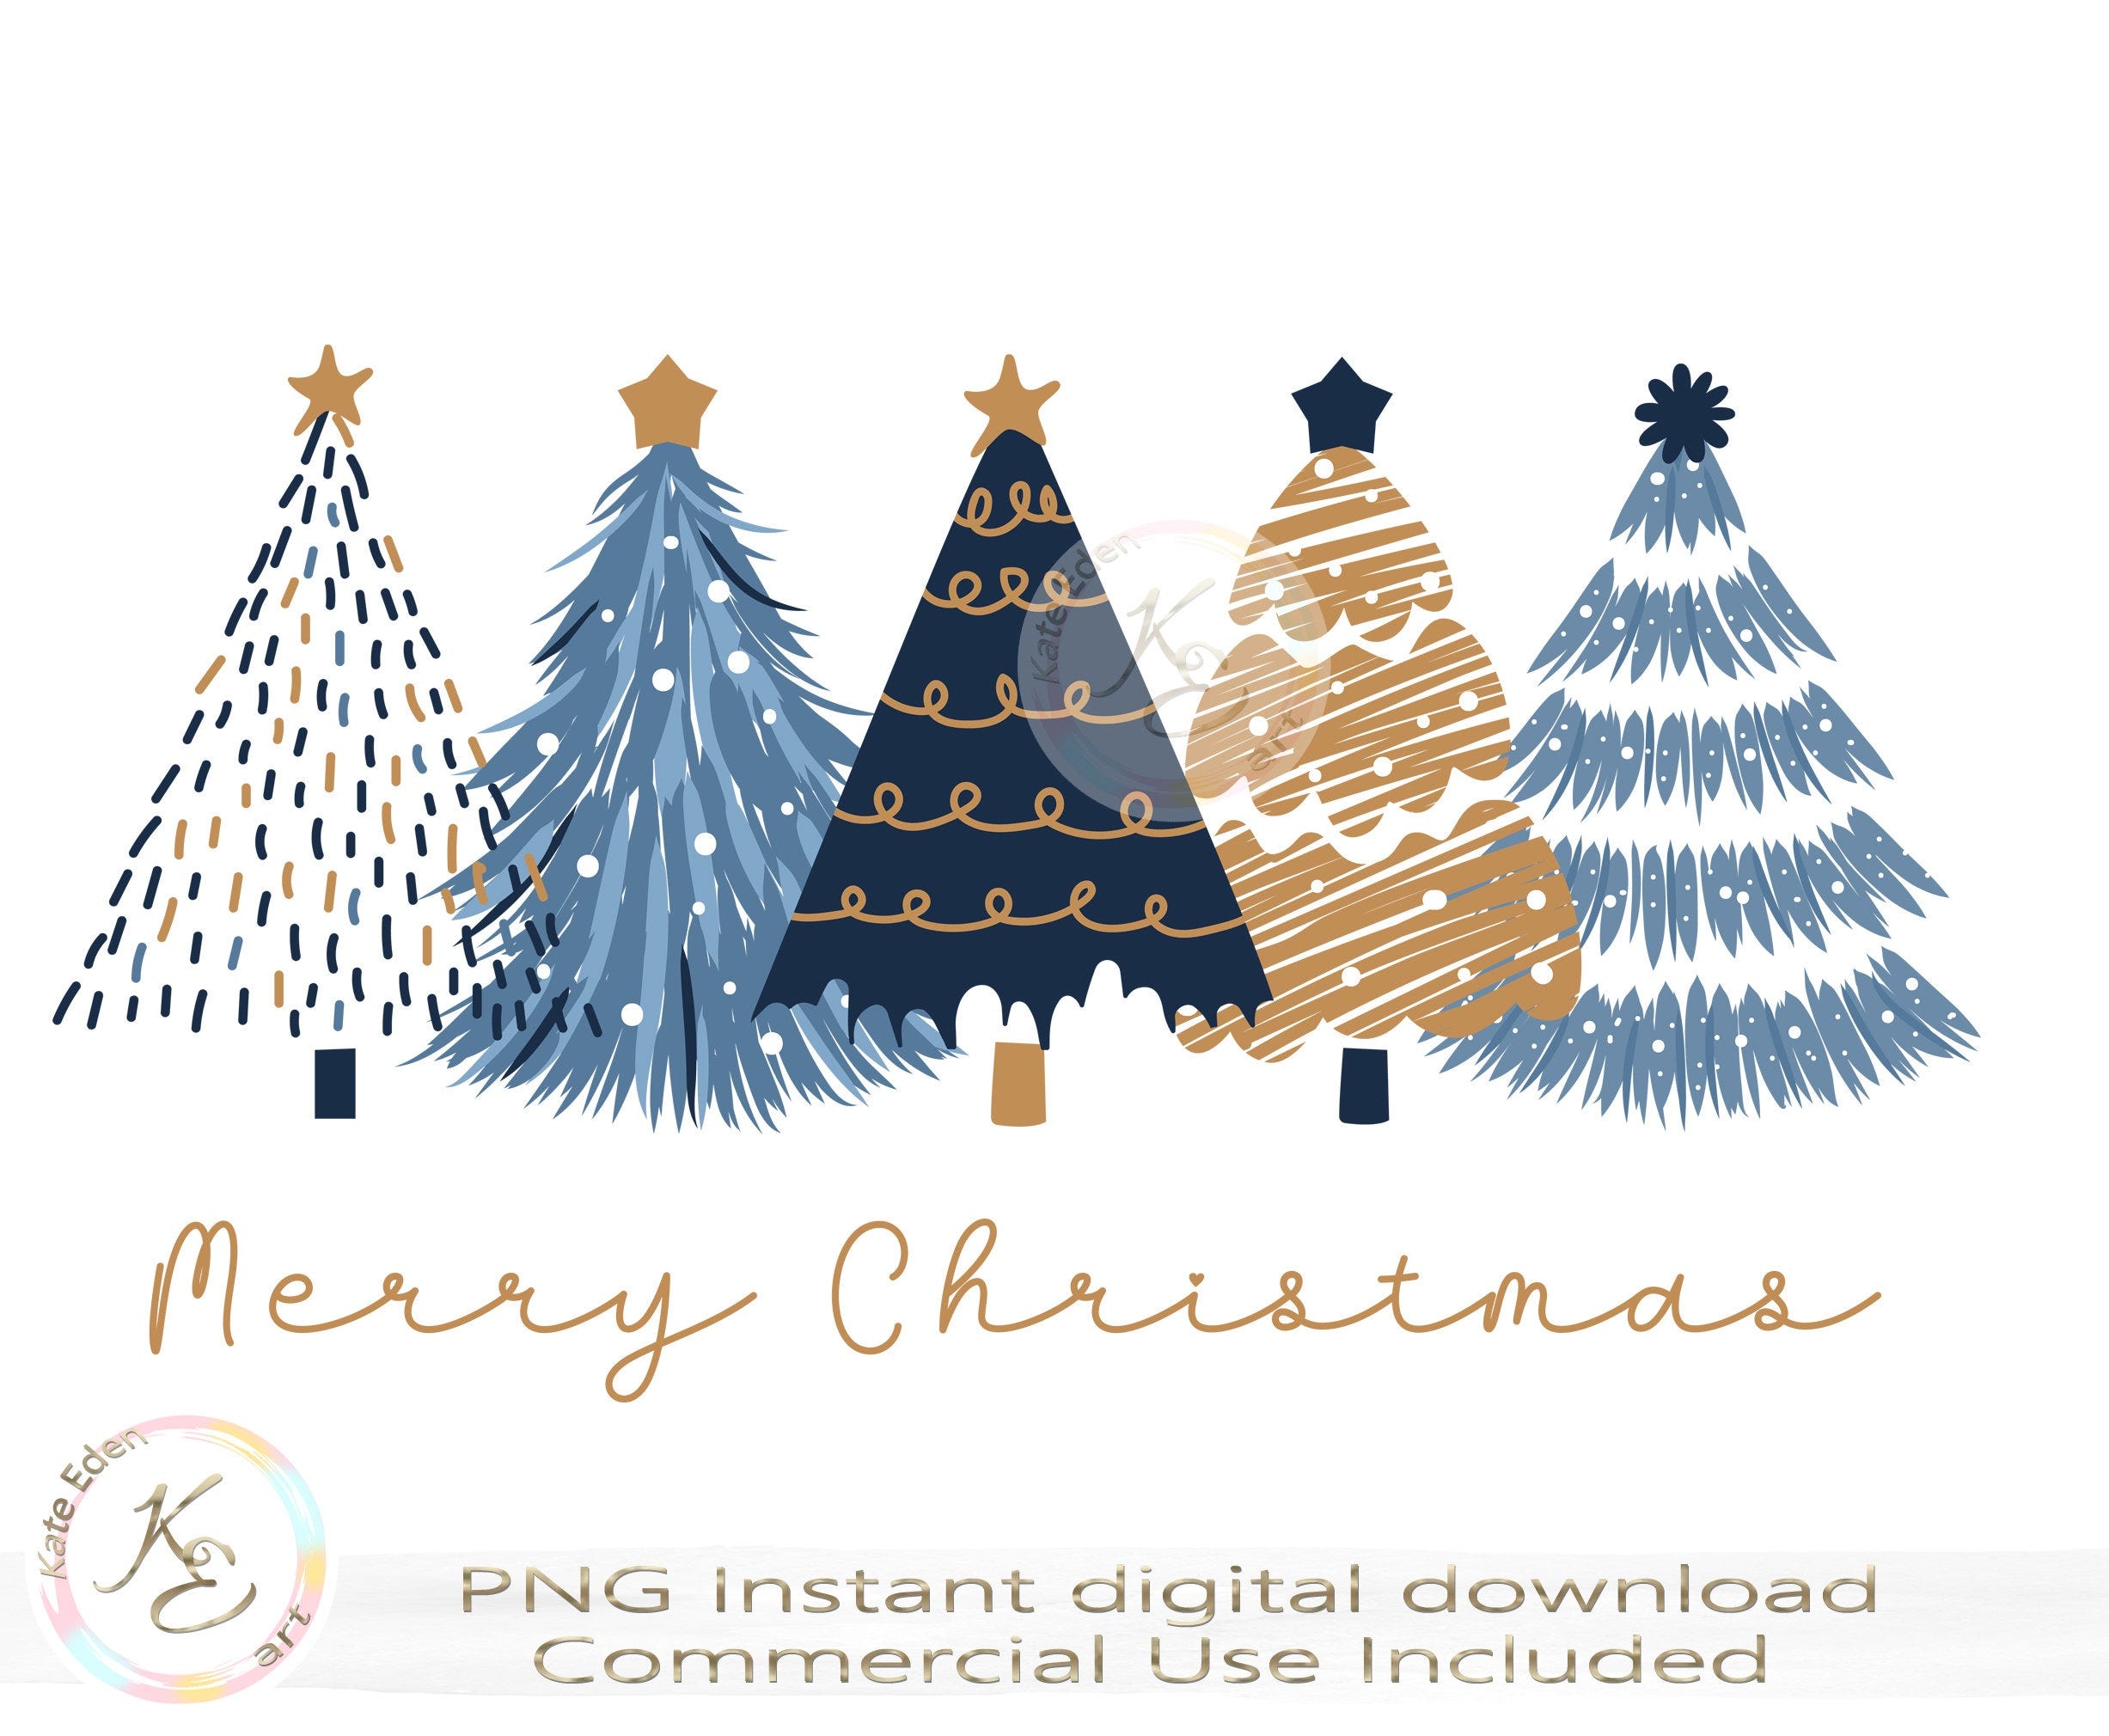 Merry Christmas PNG, Christmas Trees PNG, Digital download, Christmas Shirt Design, Christmas Sublimation, Minimalist, Blue and Gold, Navy